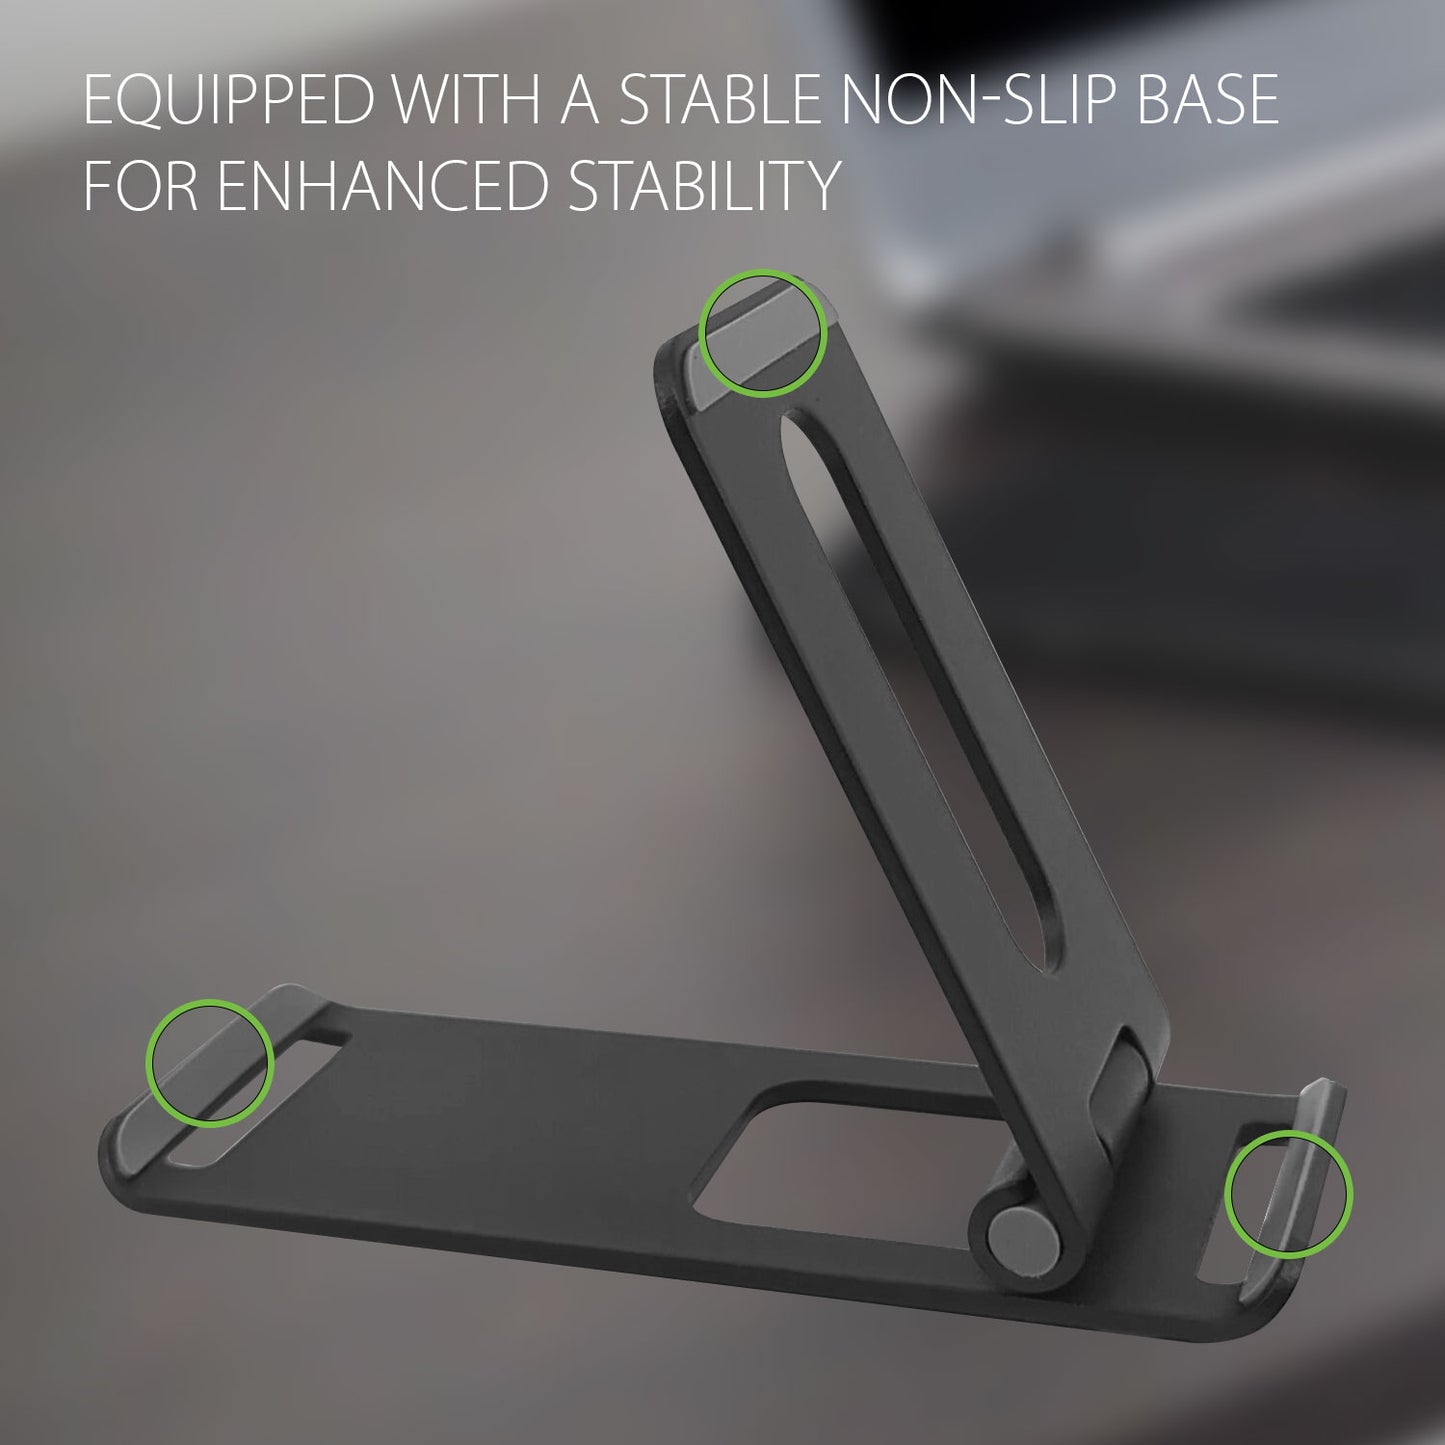 Foldable Desktop Stand, Adjustable Heavy Duty Desktop Stand Compatible to Smartphones, iPads and Tablets